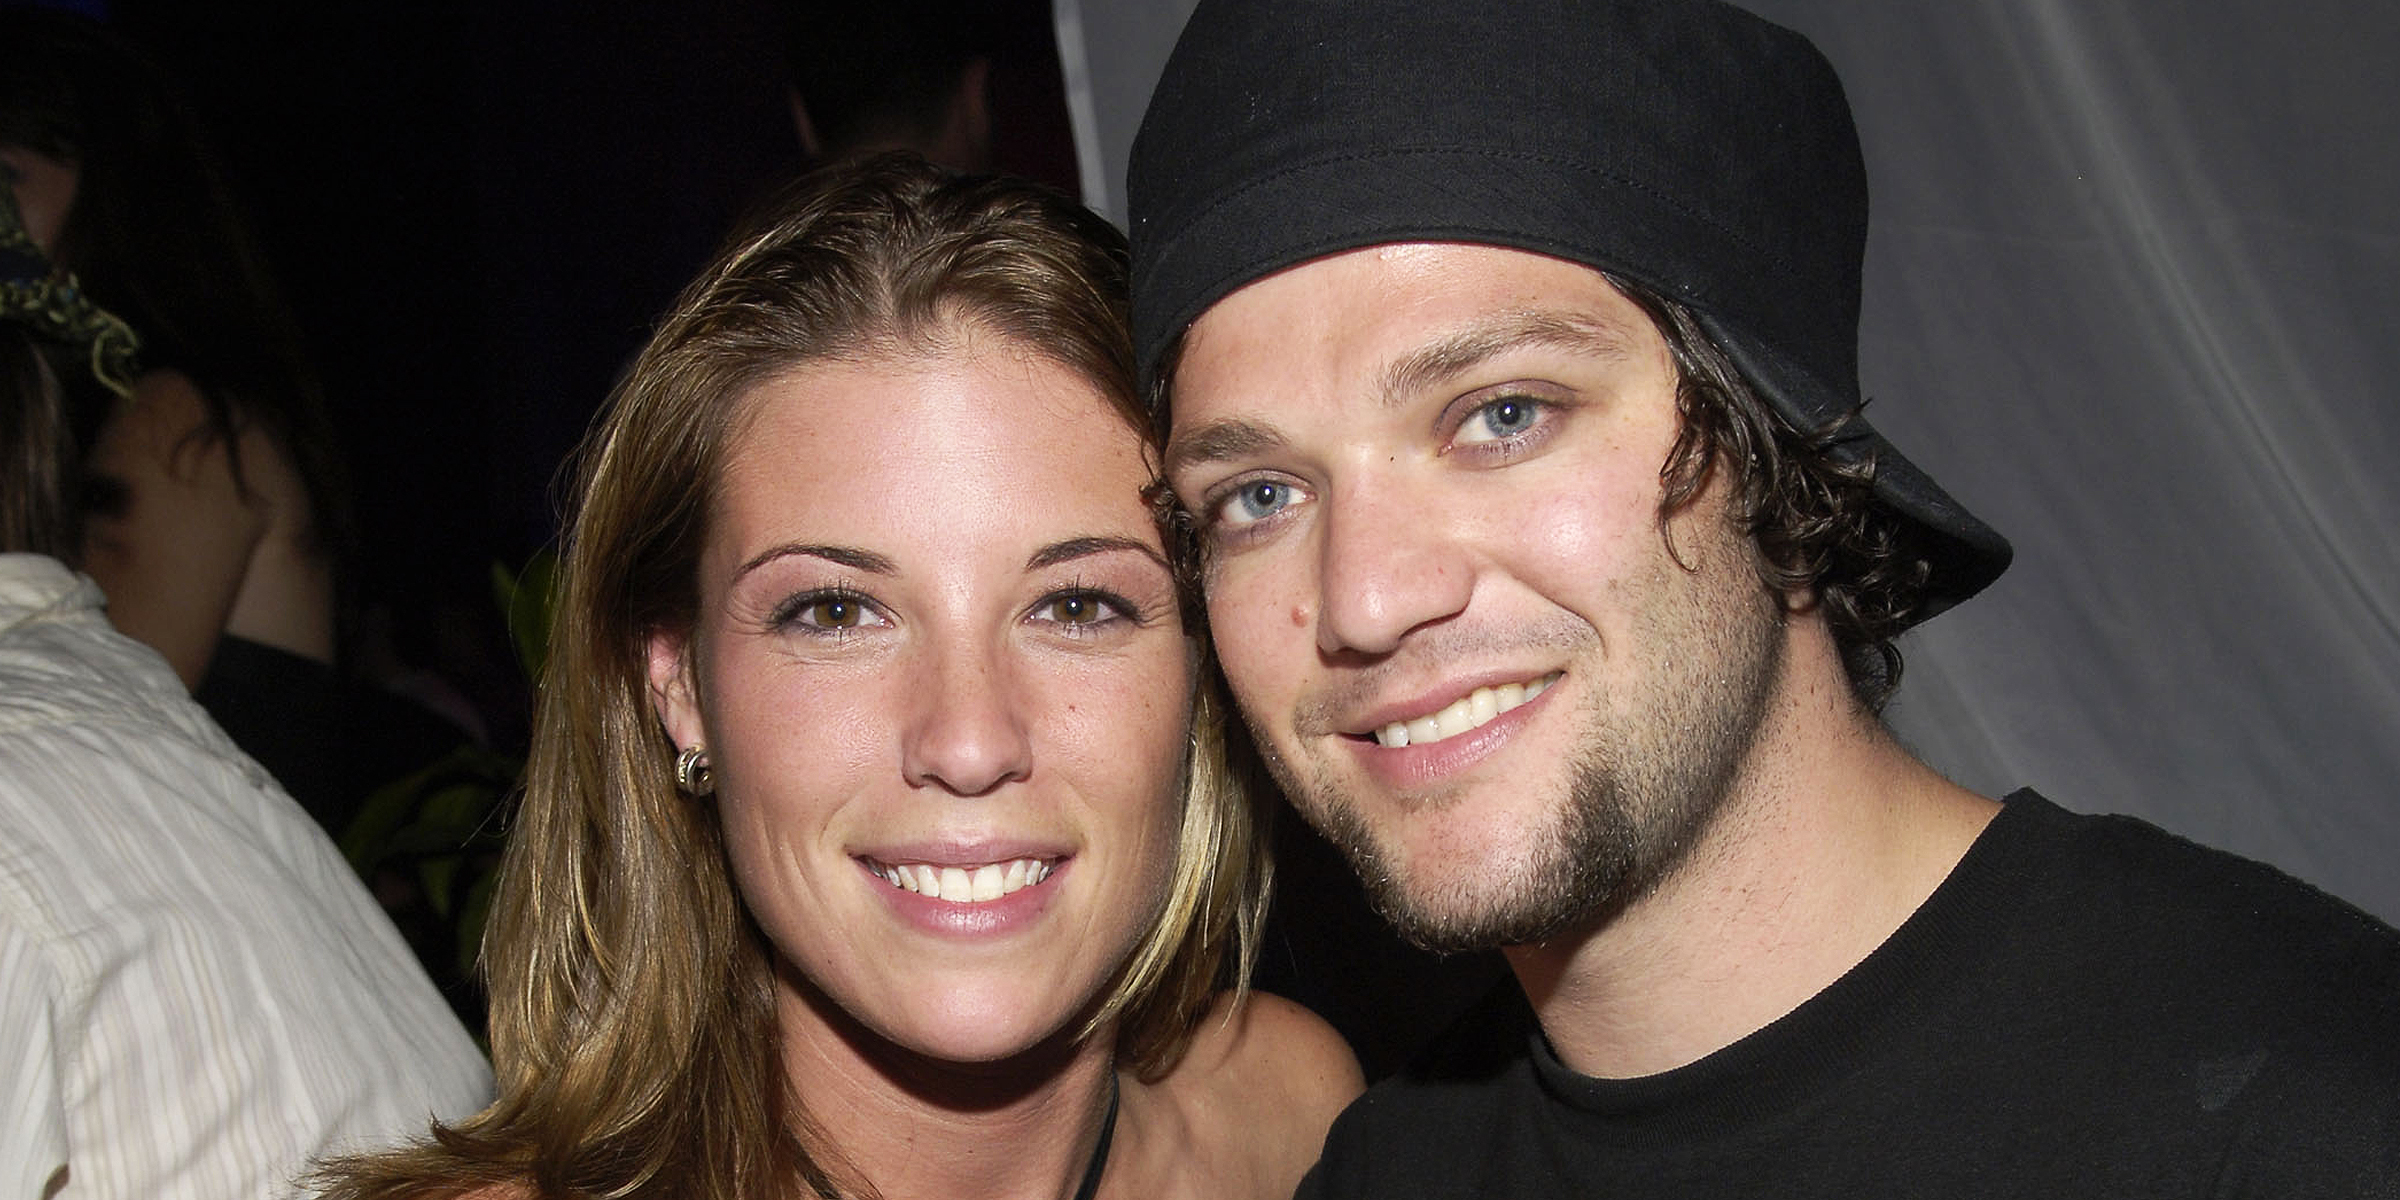 Missy Rothstein Now & Then Facts about Bam Margera's First Wife